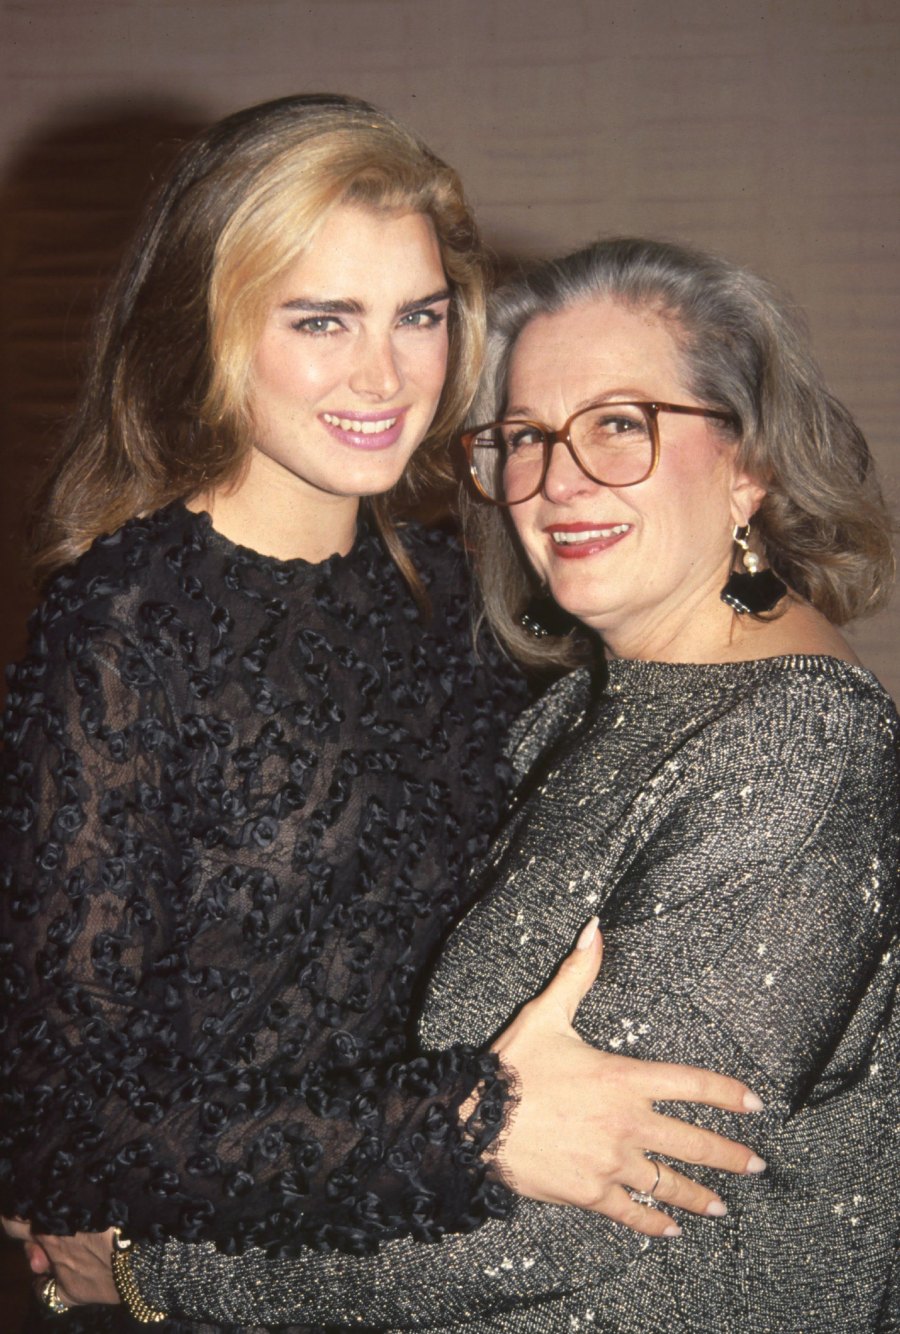 Brooke Shields Describes Alleged Sexual Assault in Documentary